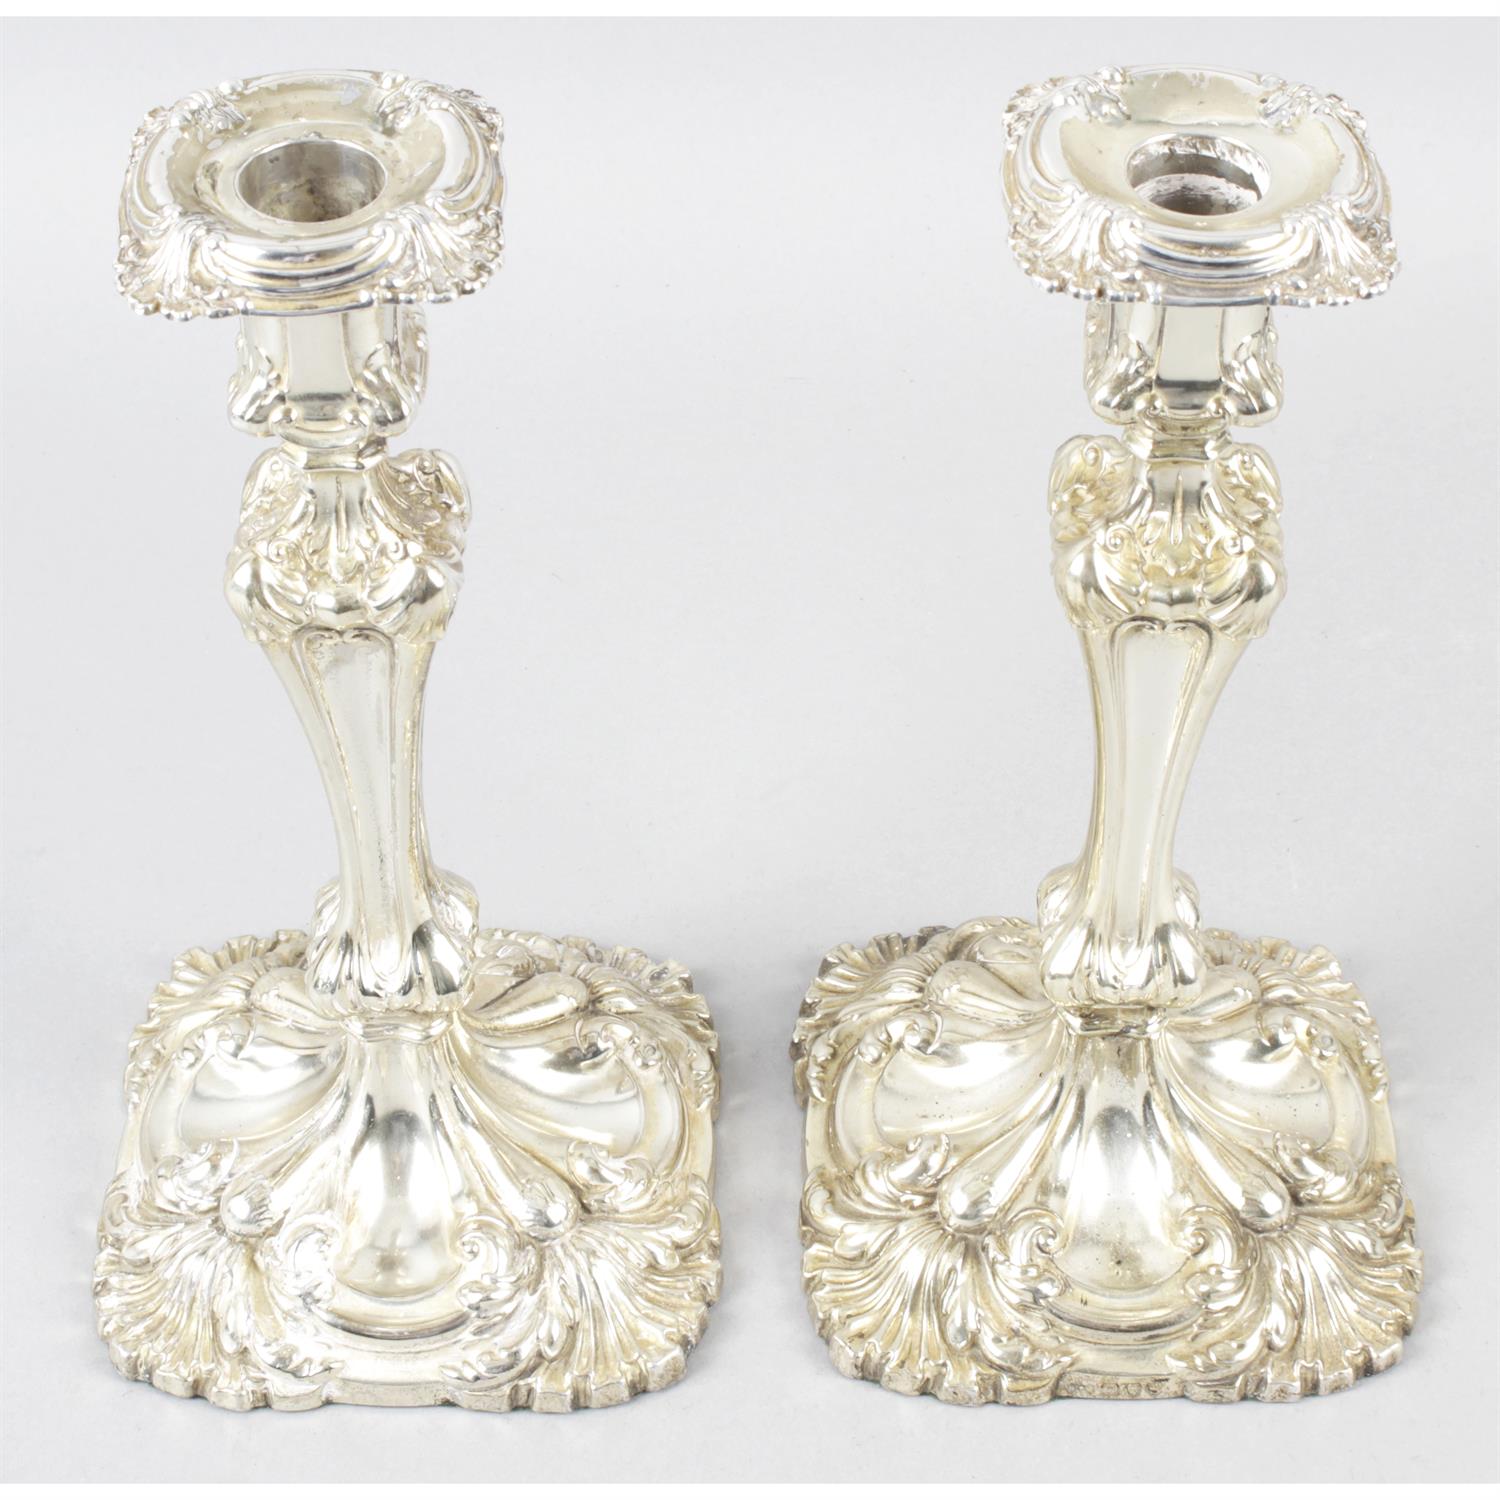 A pair of late Victorian silver candlesticks (filled).